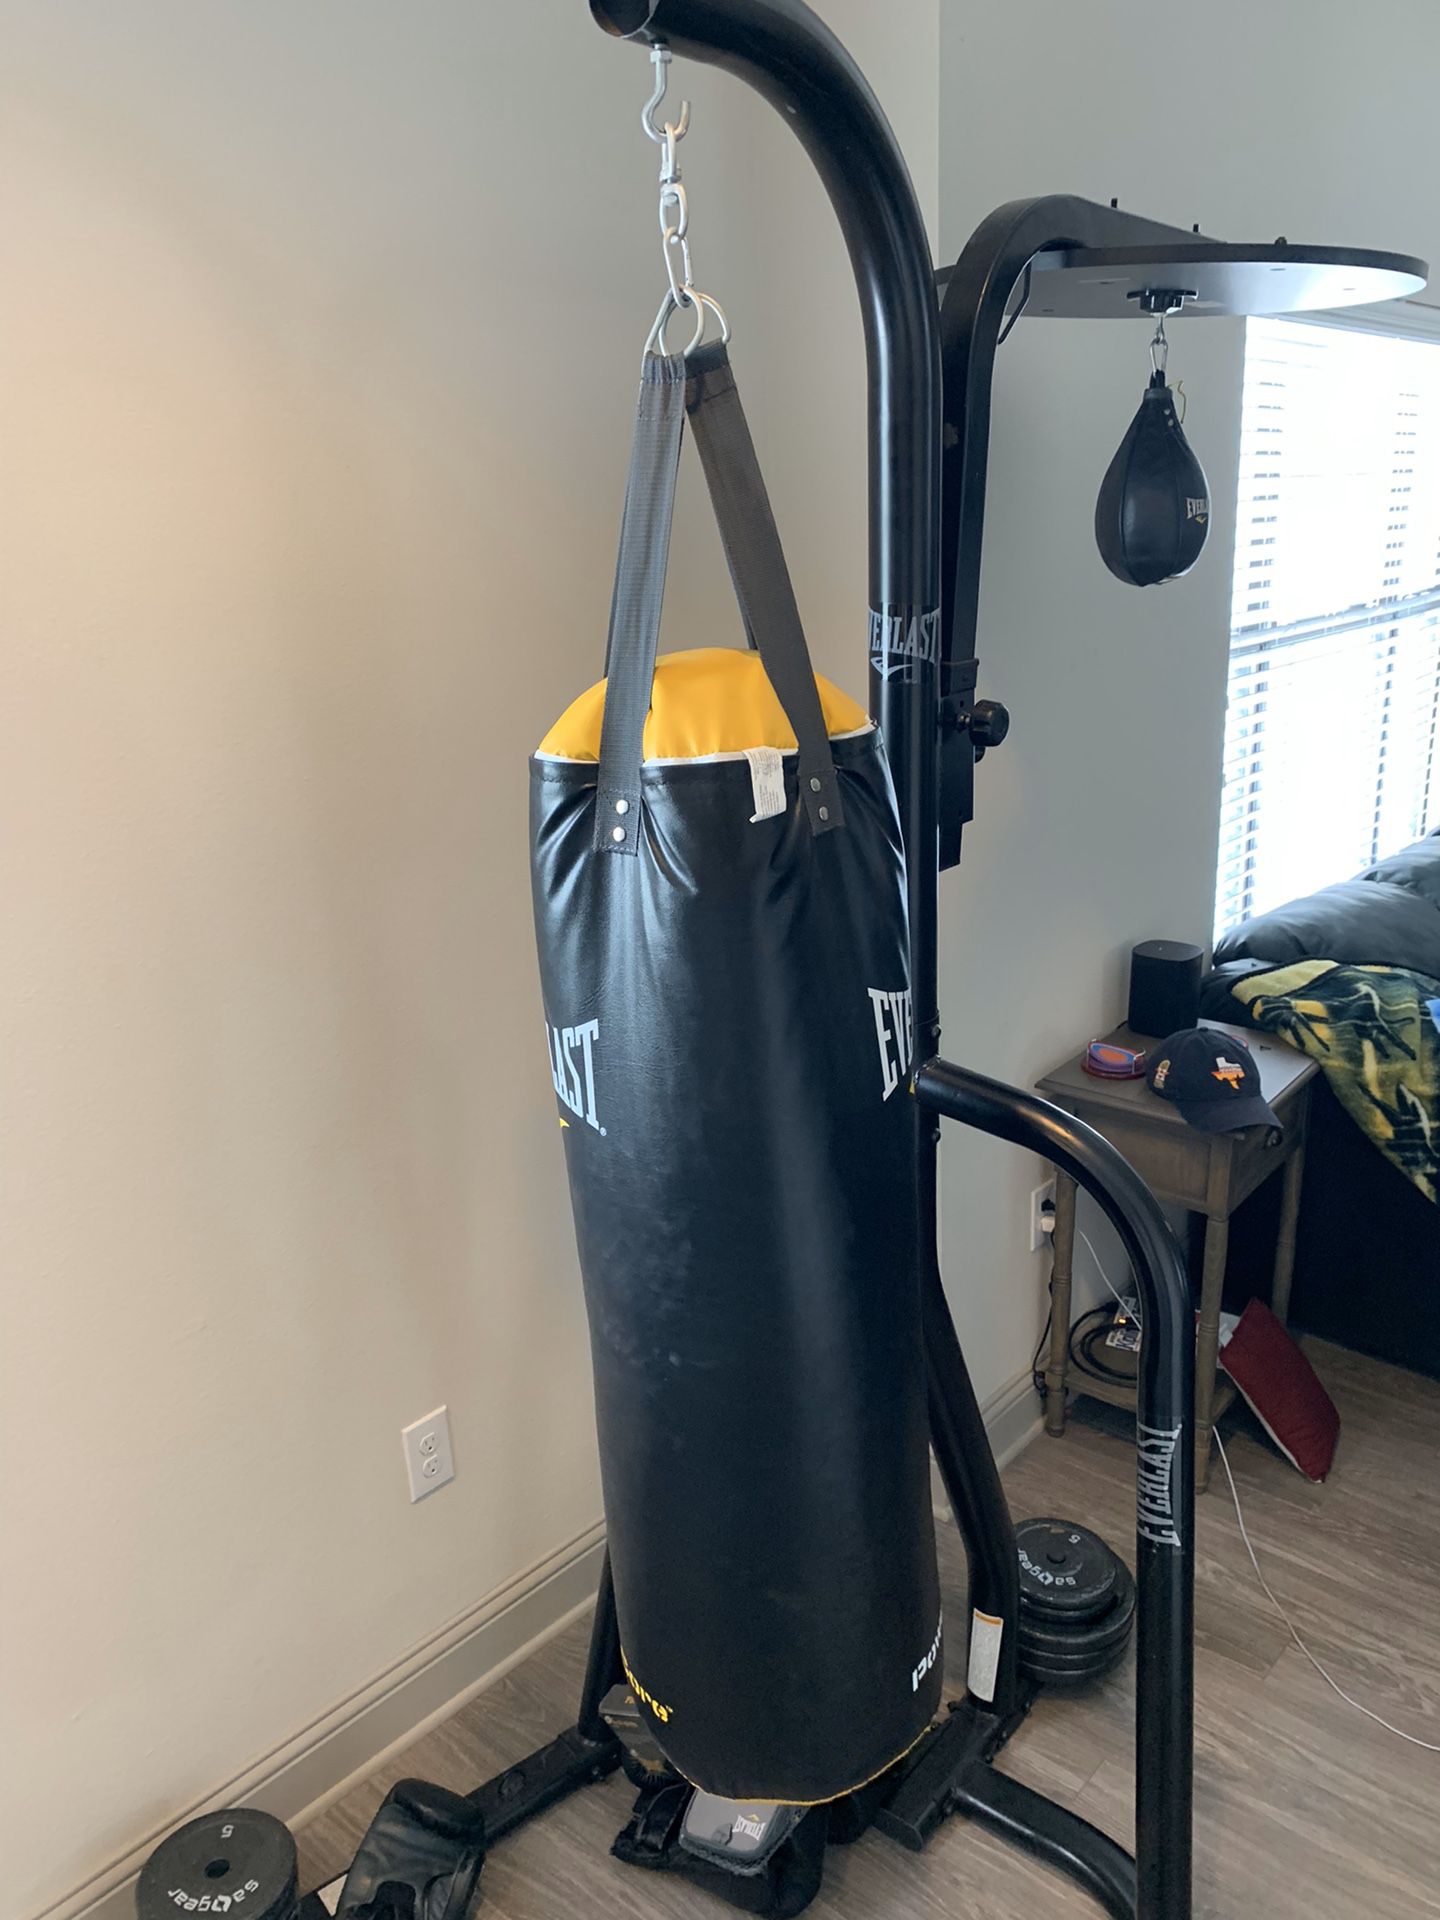 Everlast punching bag and speed bag with stand